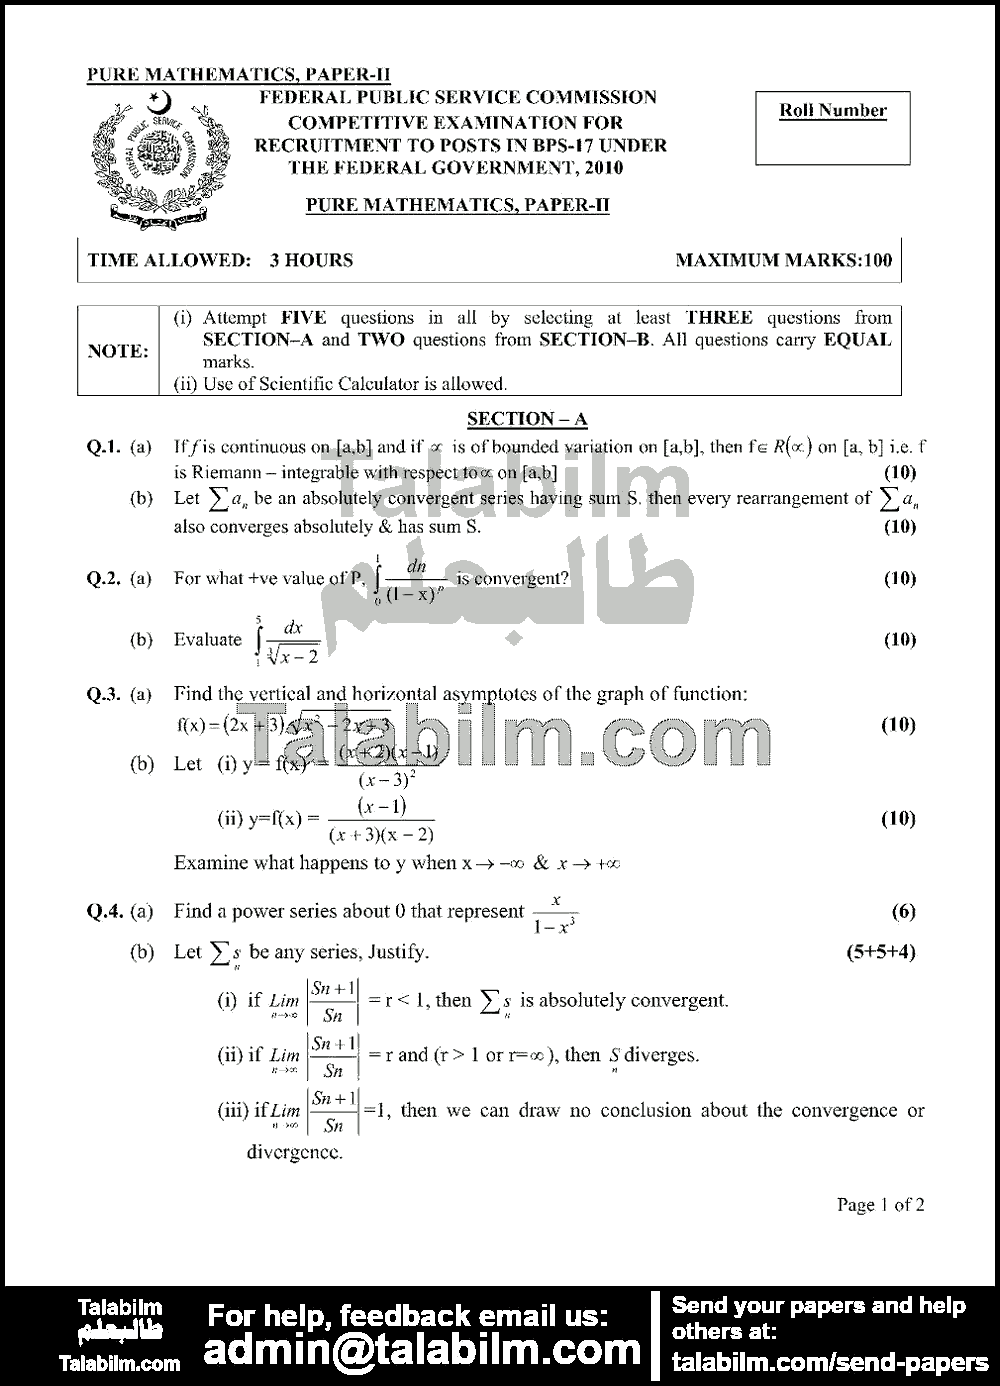 Pure Mathematics 0 past paper for 2010 Page No. 2